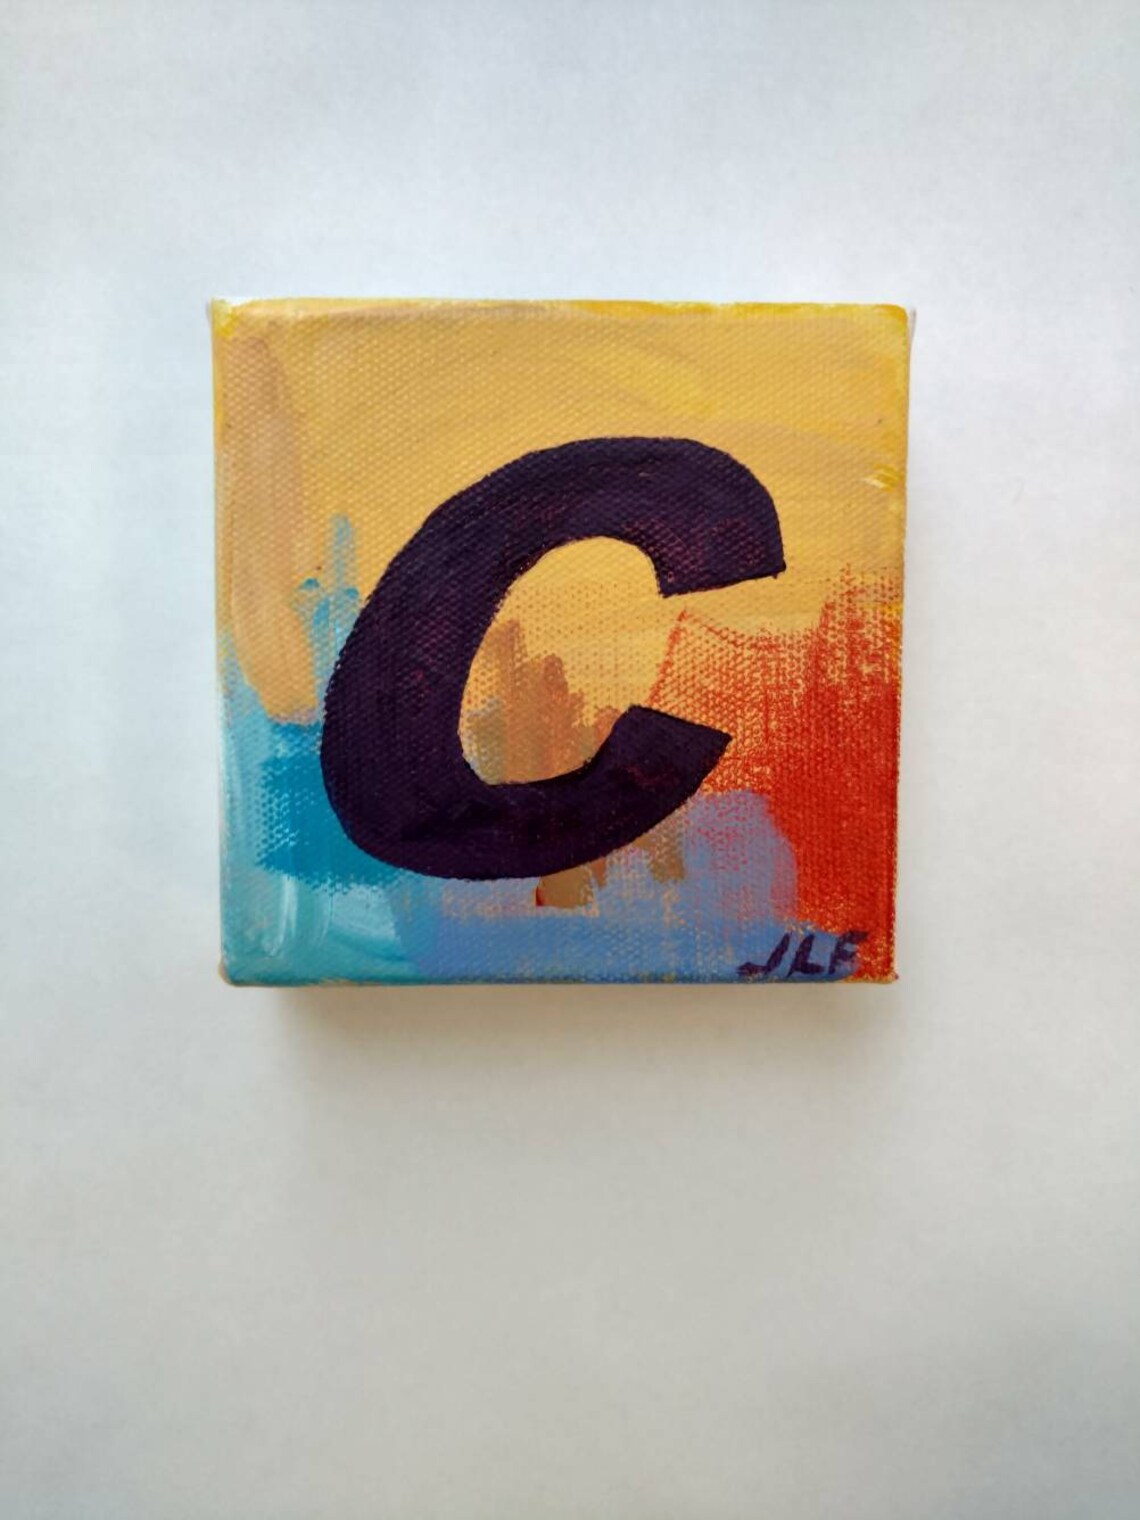 The Letter C An Original Acrylic Painting On Canvas By Jlf Etsy